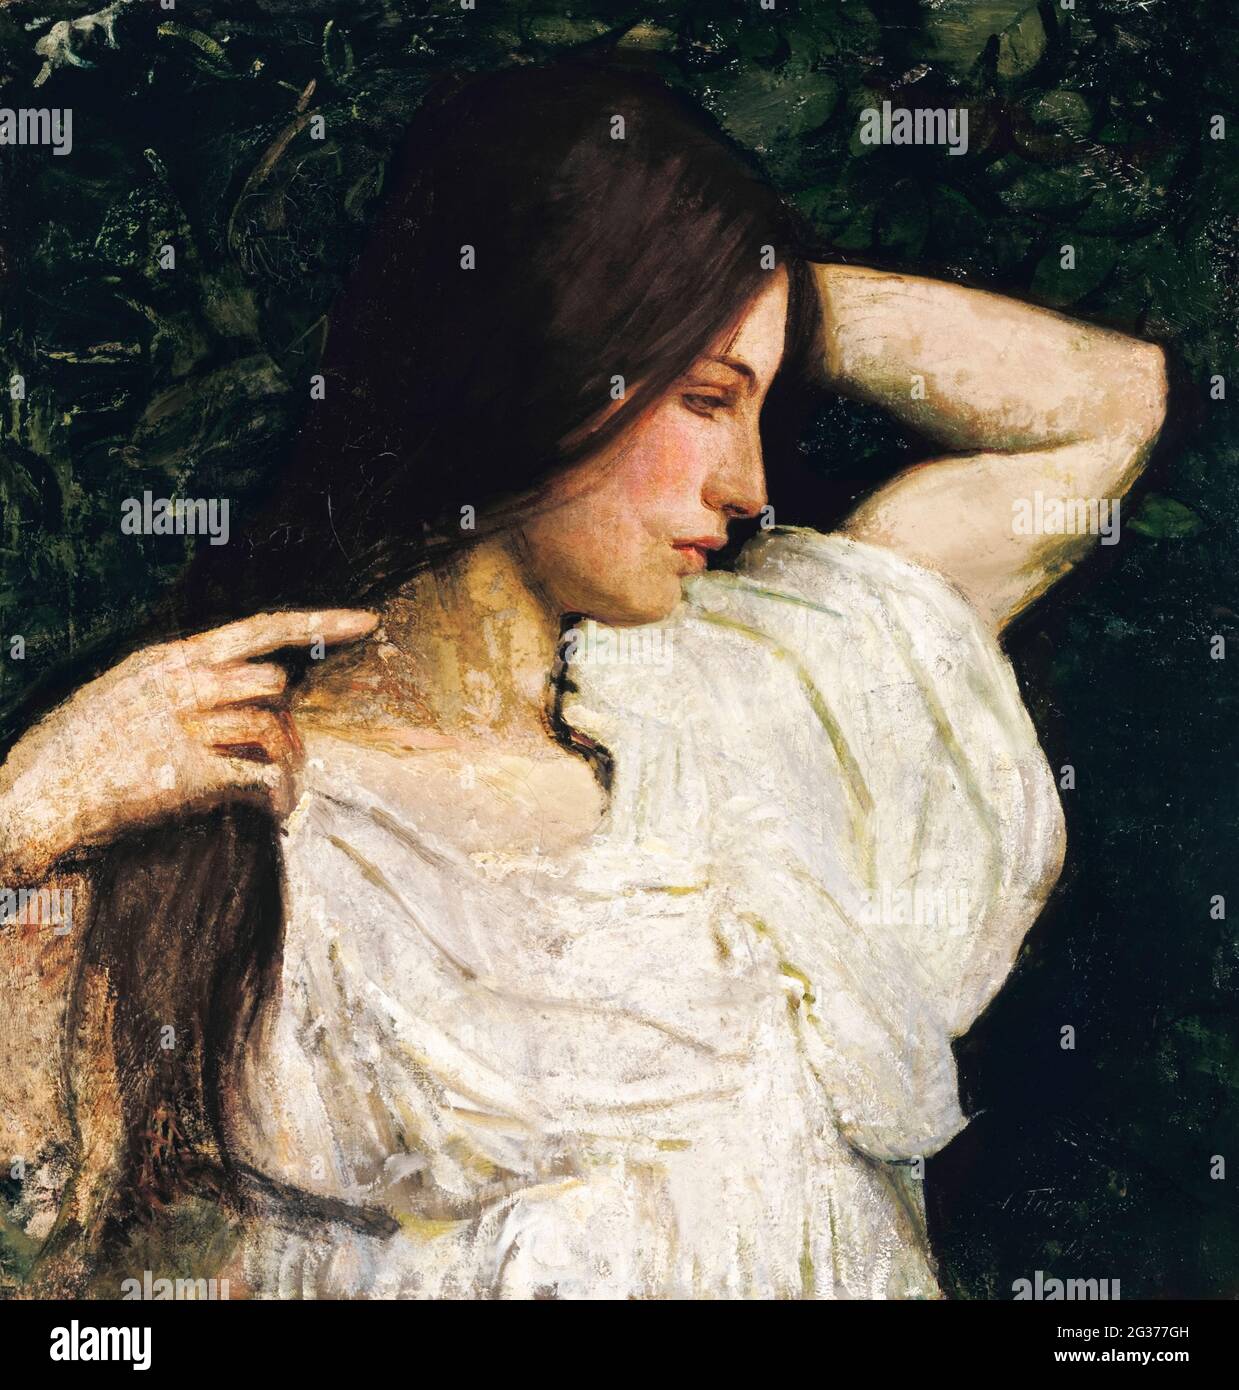 Girl Arranging Her Hair (1918 - 1919) painting in high resolution by Abbott Handerson Thayer. Stock Photo